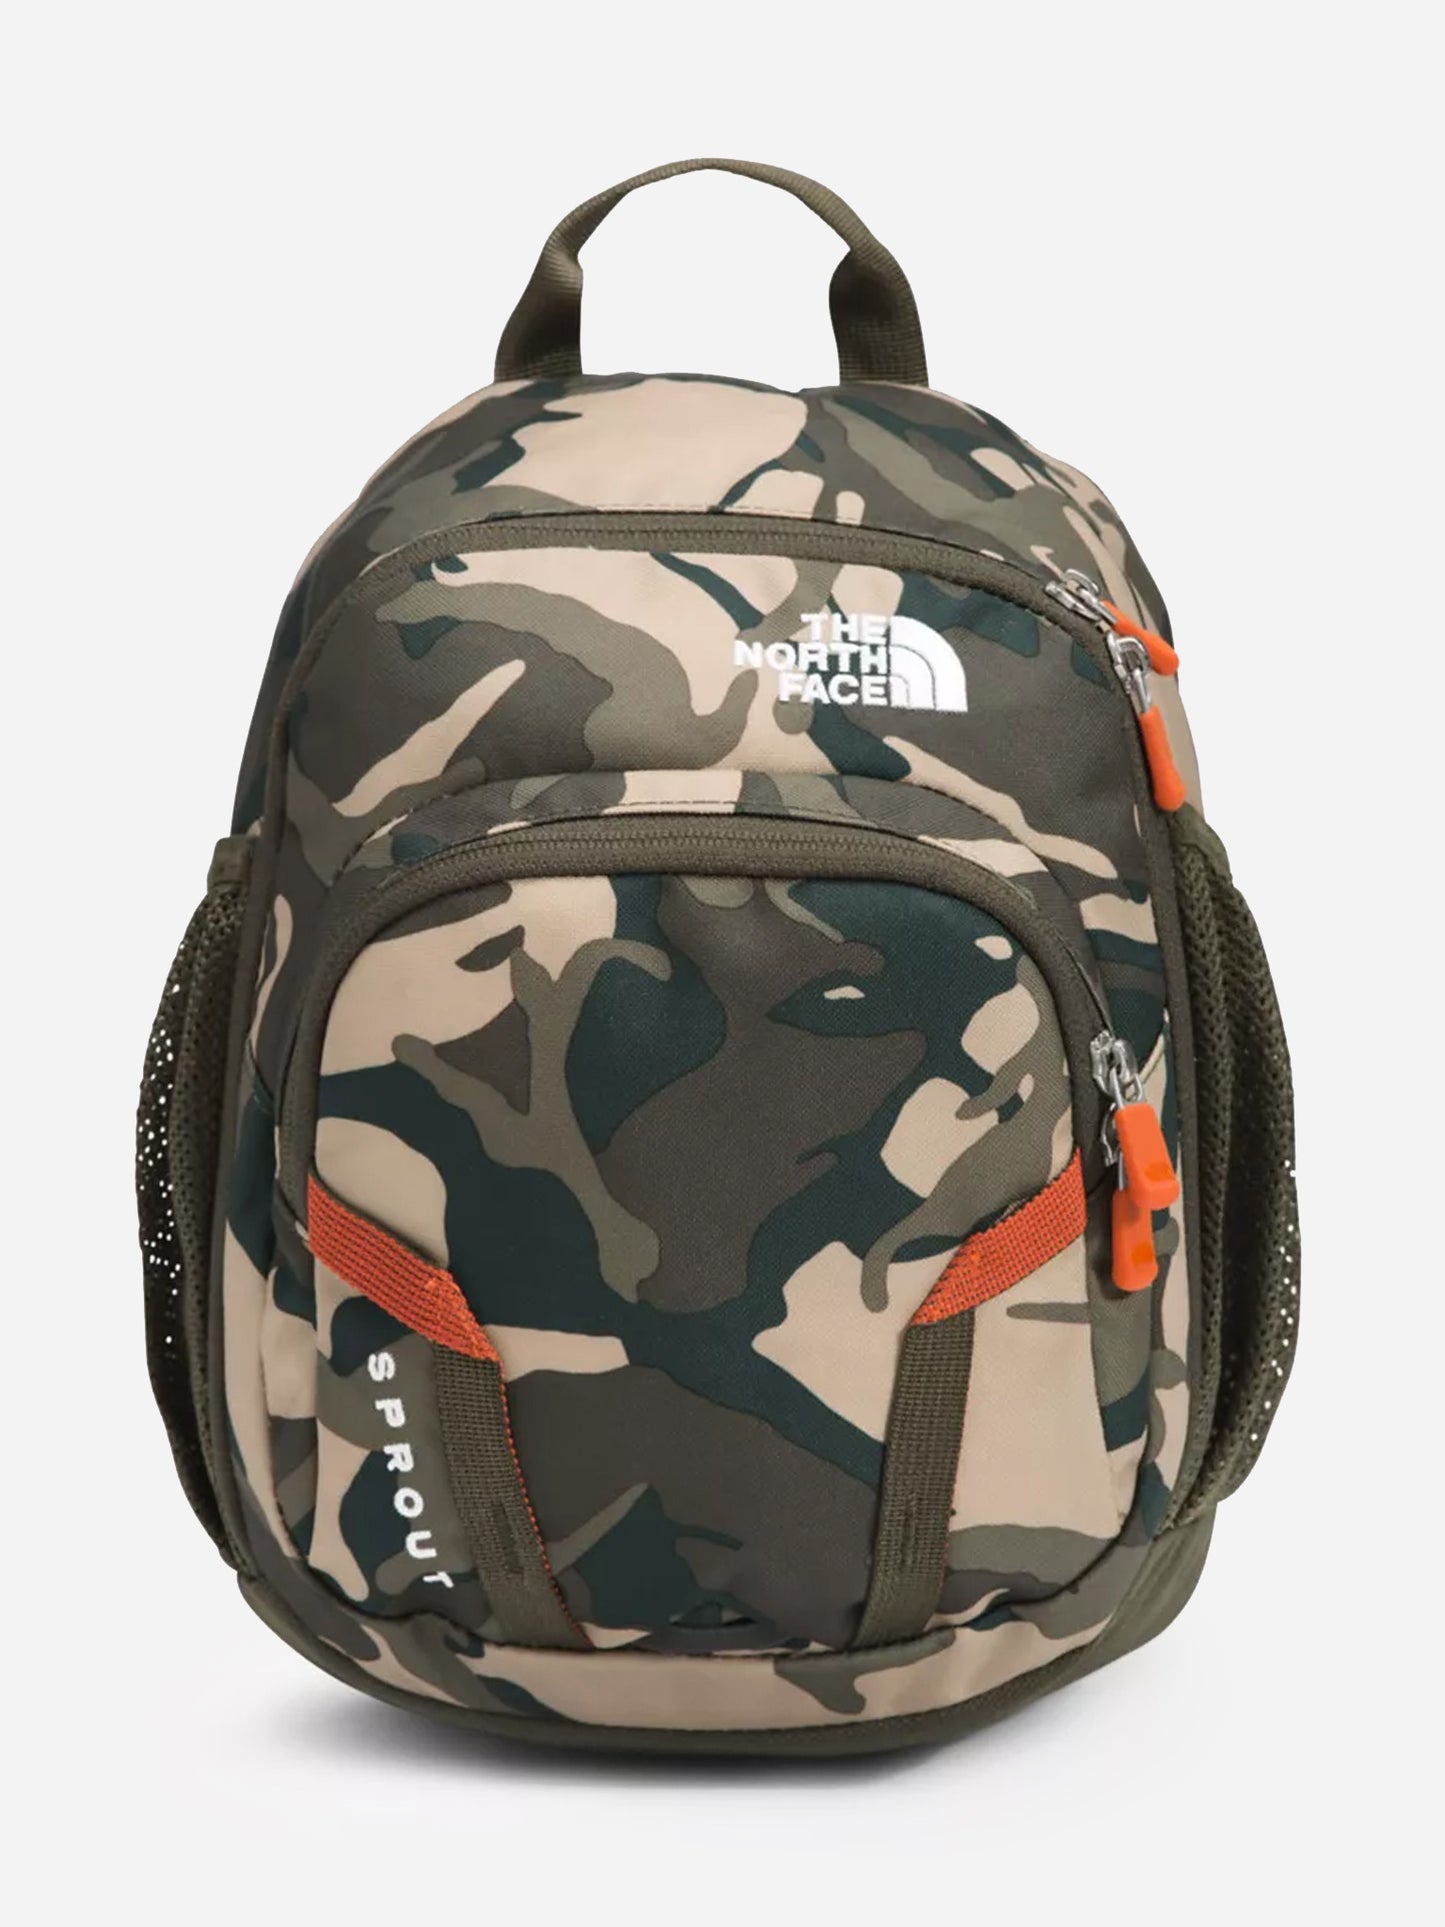 The North Face Kids' Sprout Backpack